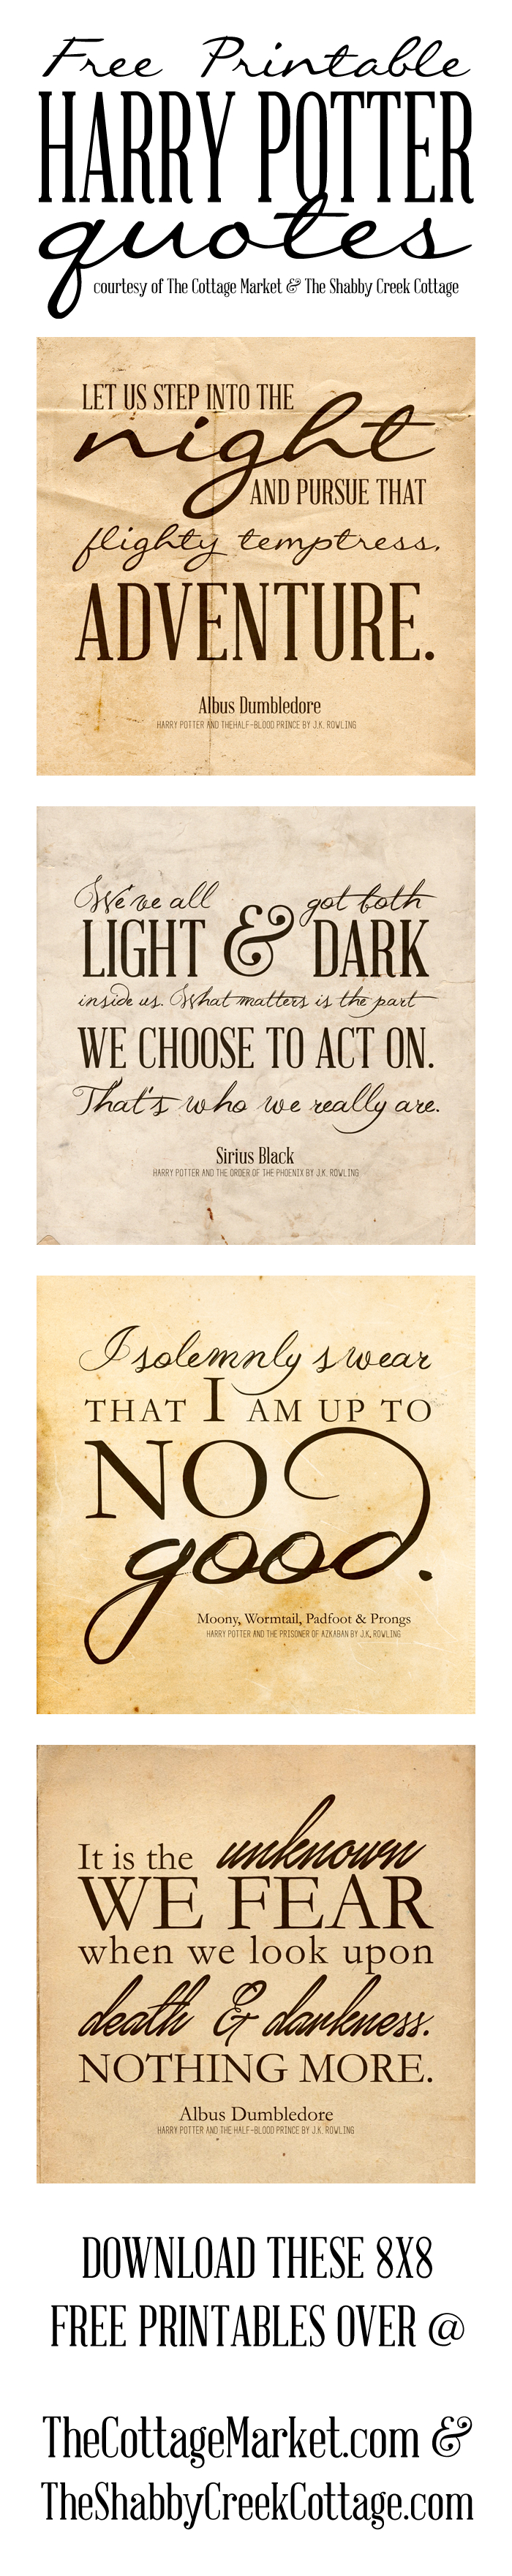 Free Harry Potter Quotes Printables | All About Harry Potter - Free Printable Harry Potter Posters